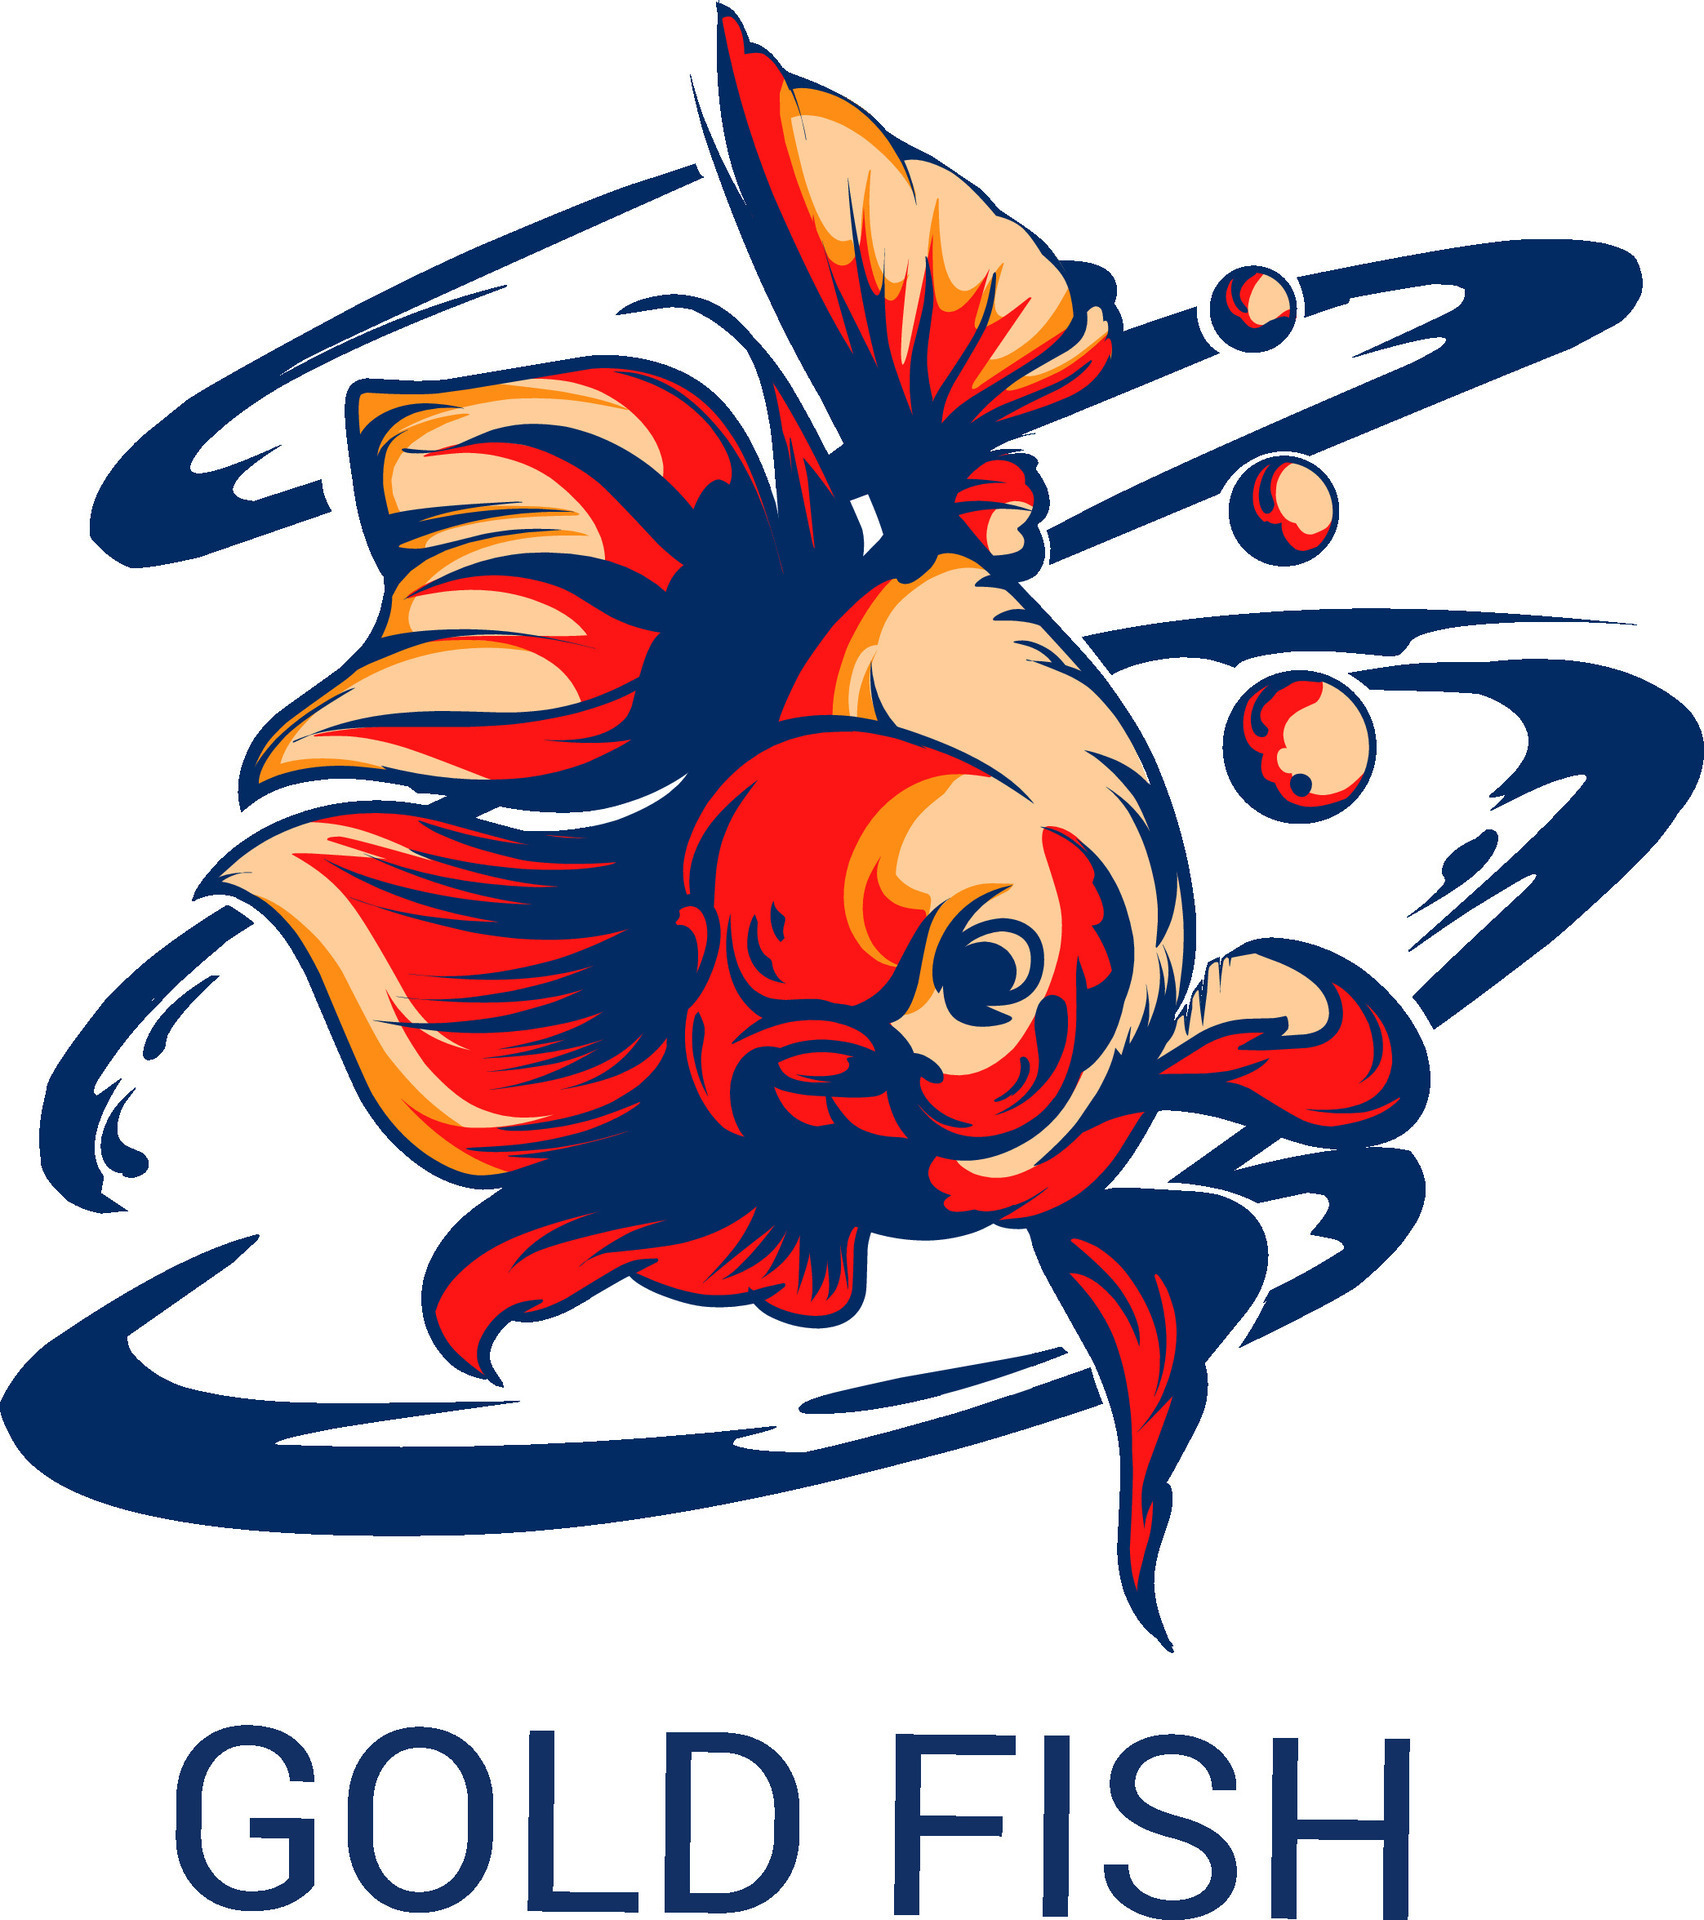 vector illustration, goldfish, suitable for company logos or